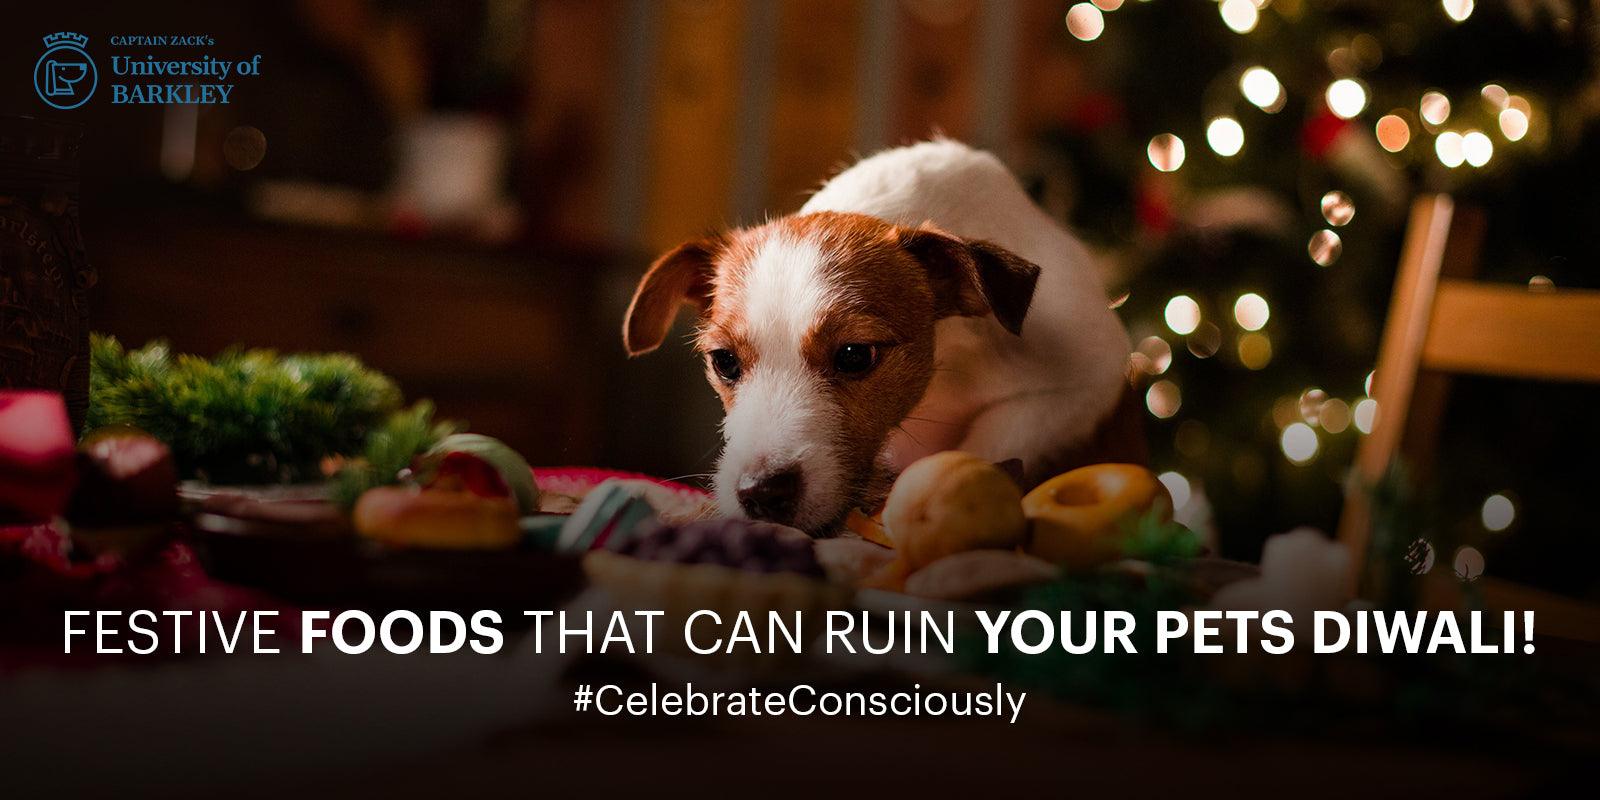 Festive Foods That Can Ruin Your Pets Diwali!